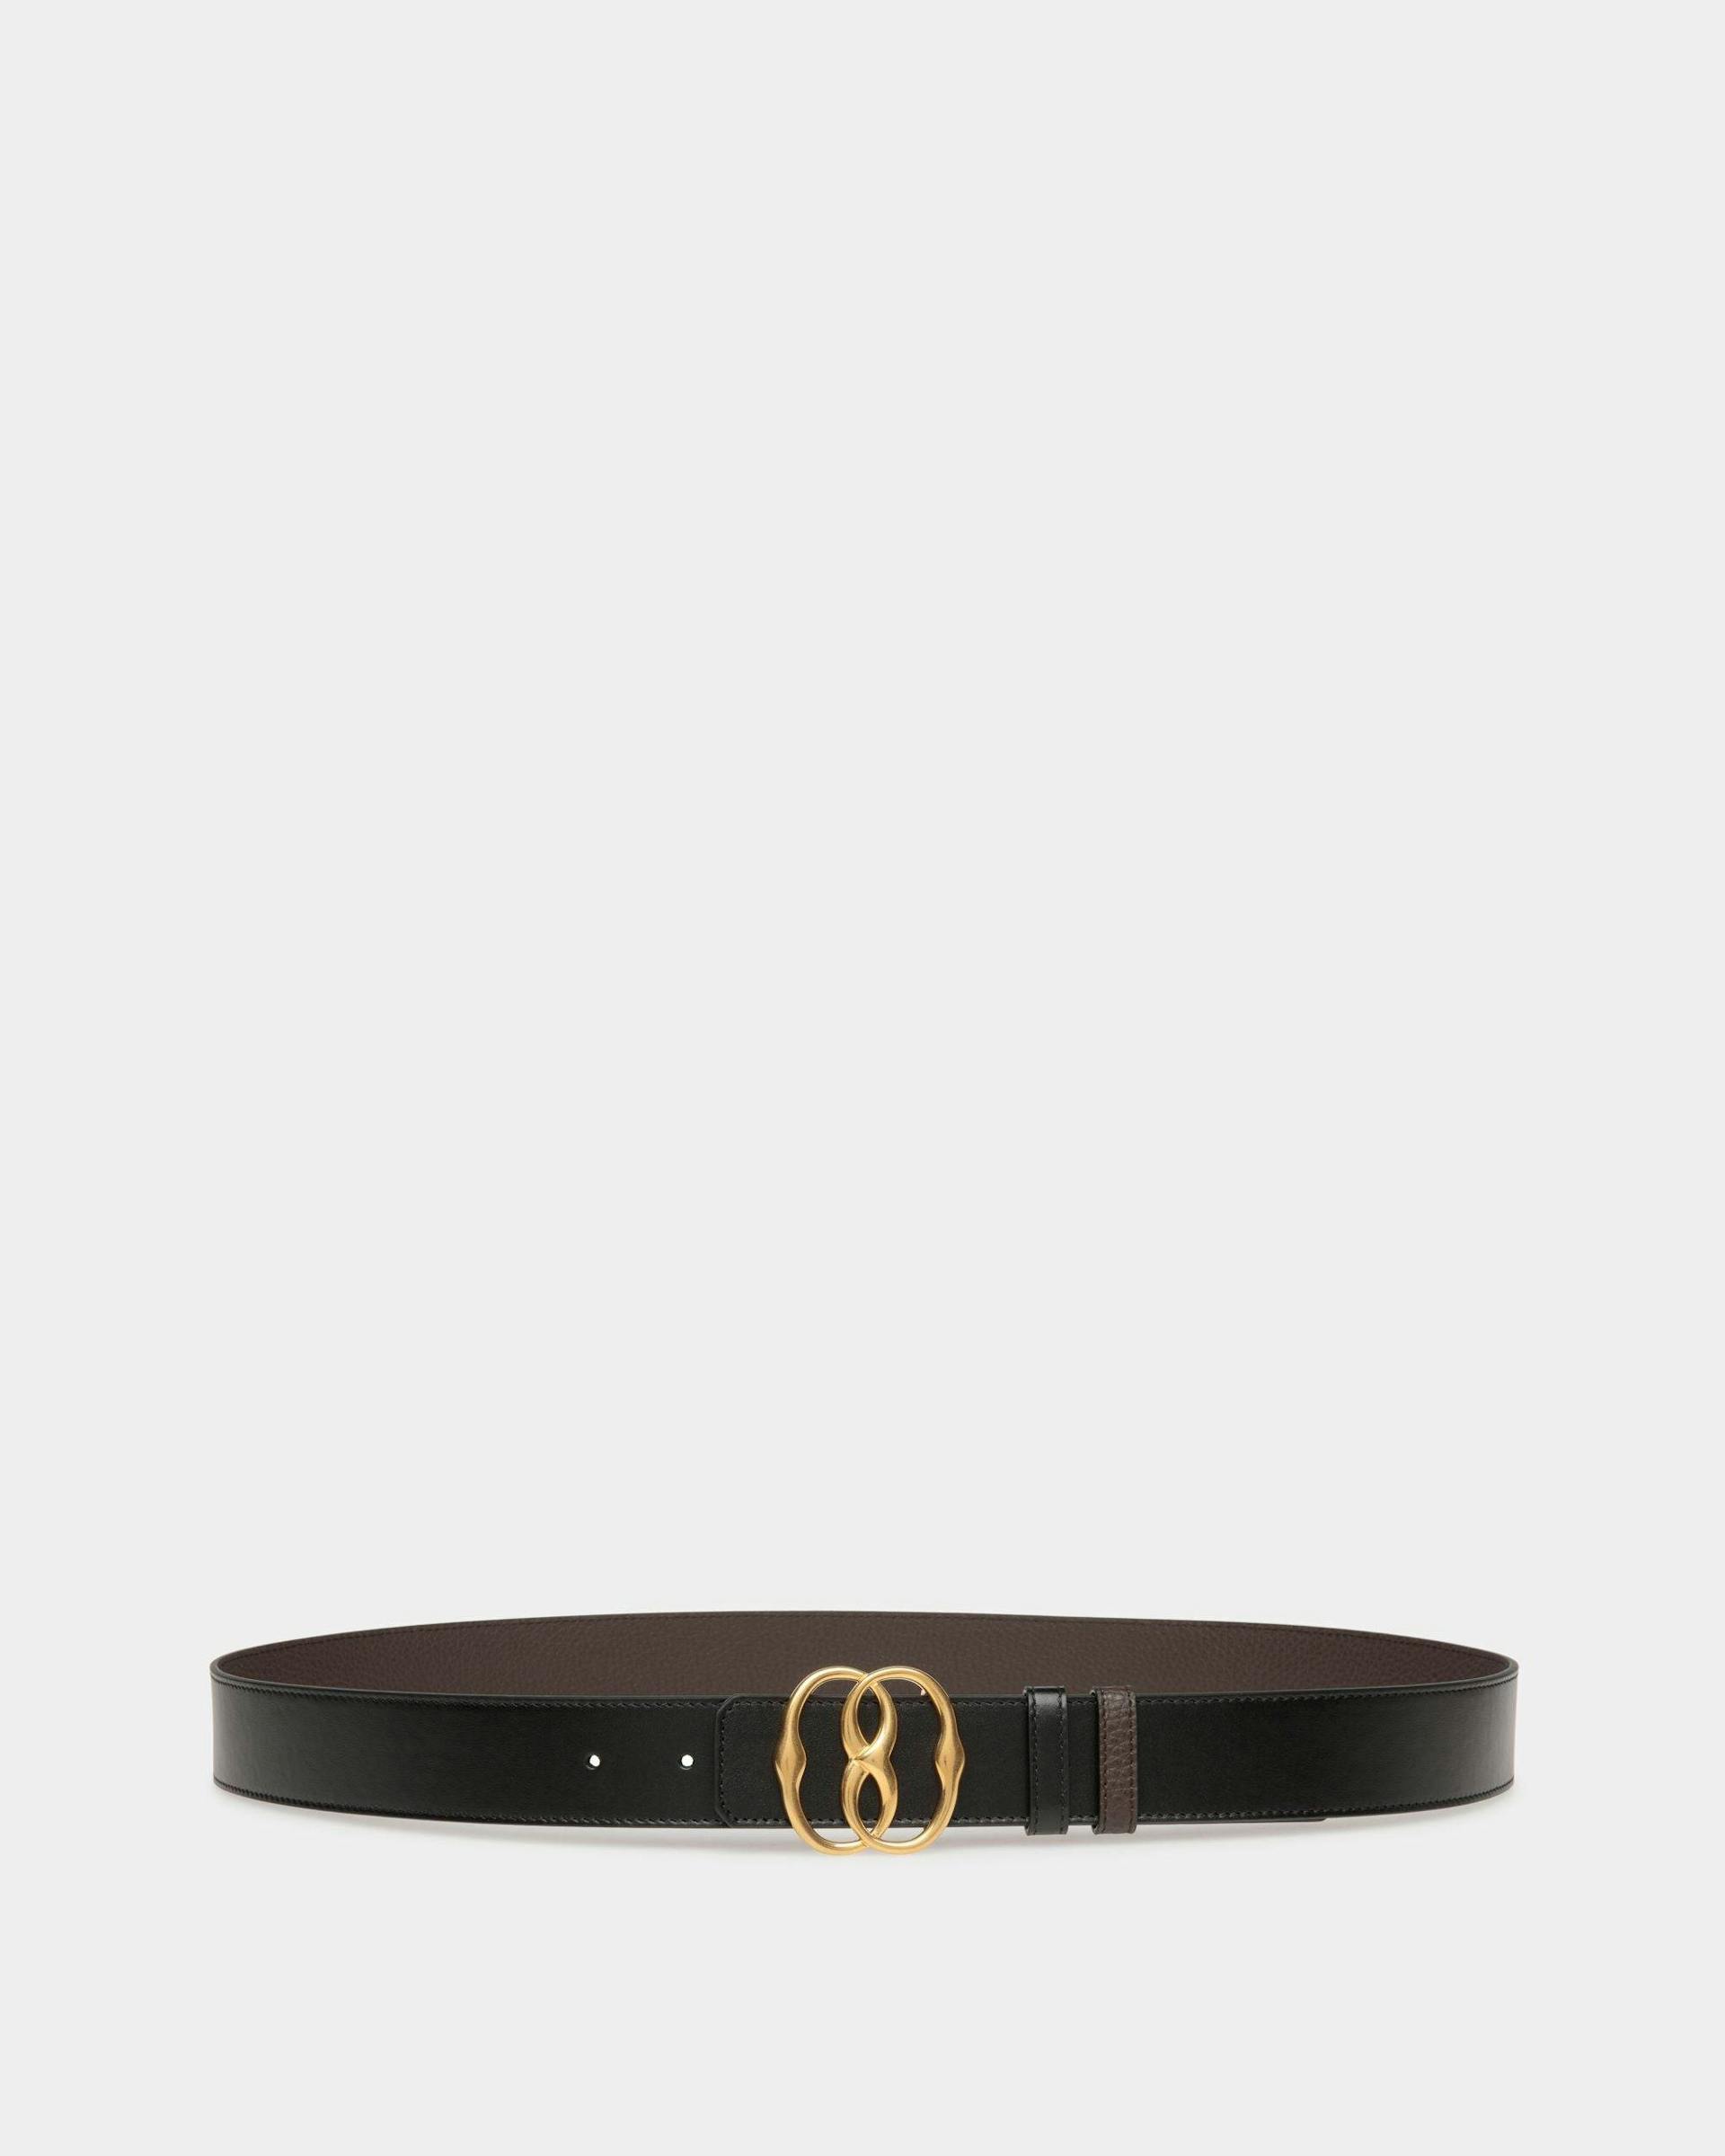 Men's Bally Iconic 35mm Belt In Brown And Black Leather | Bally | Still Life Front